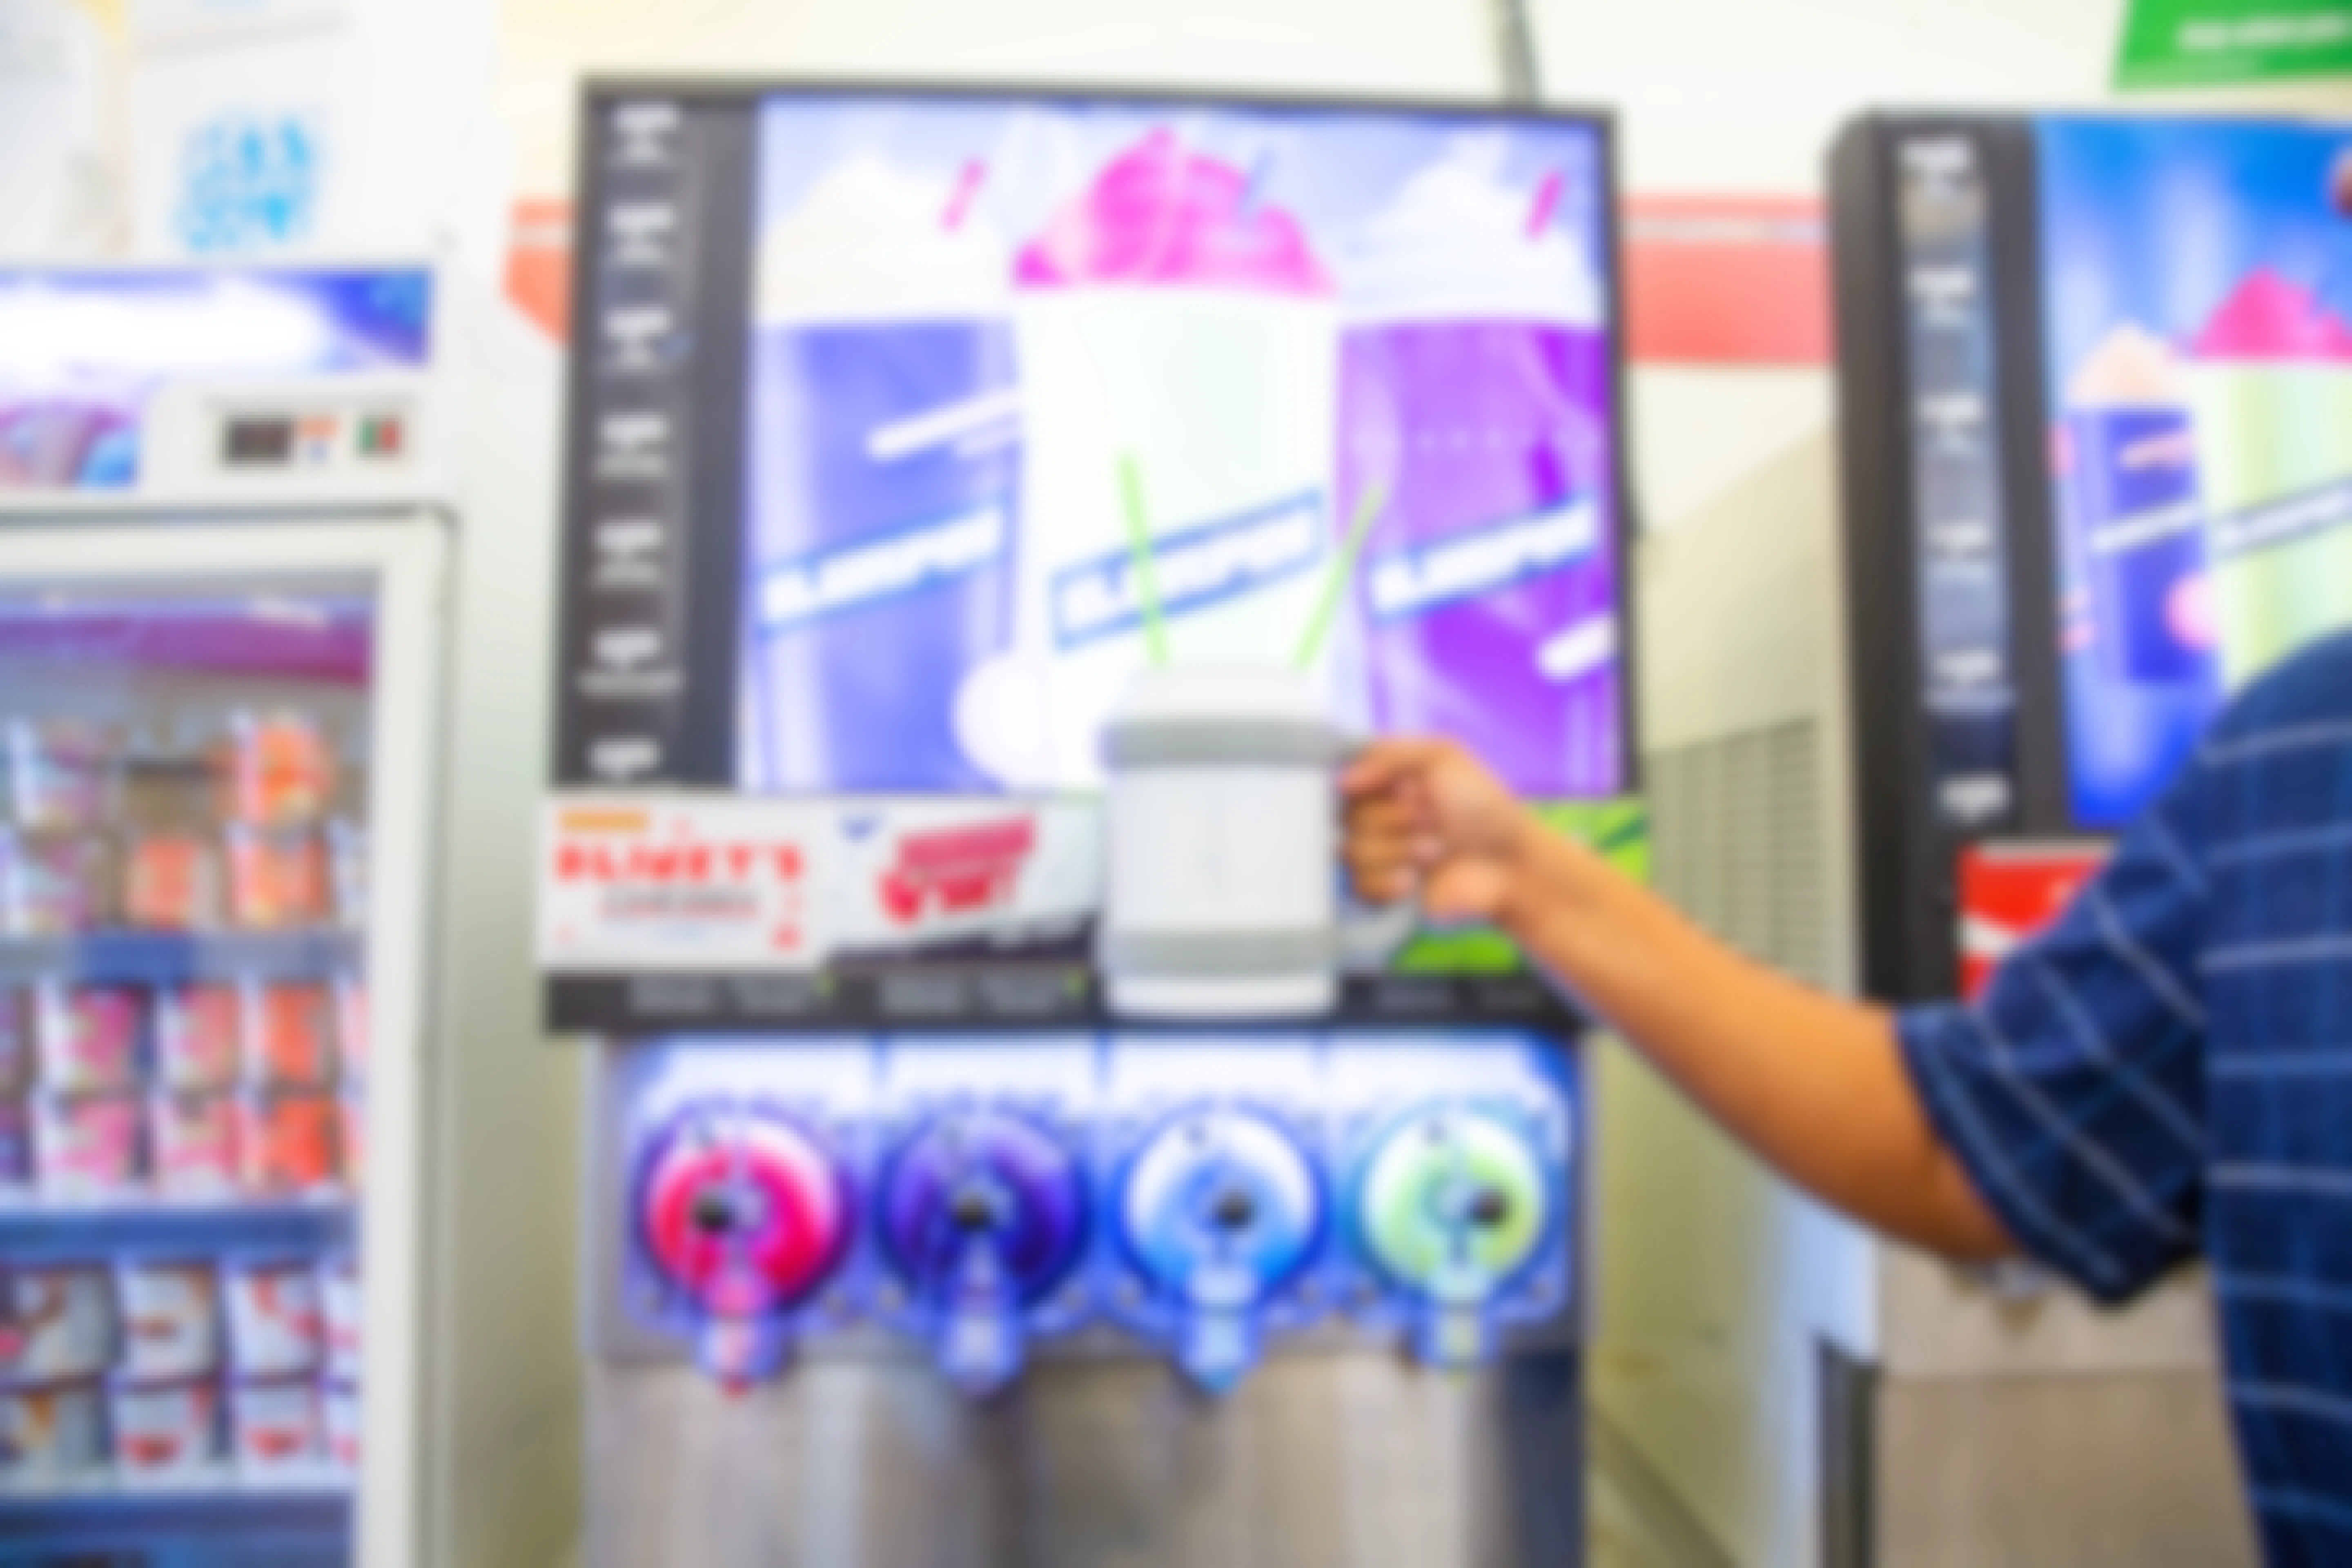 Bring Your Own Cup to 7-Eleven on April 29 for a $1.99 Slurpee